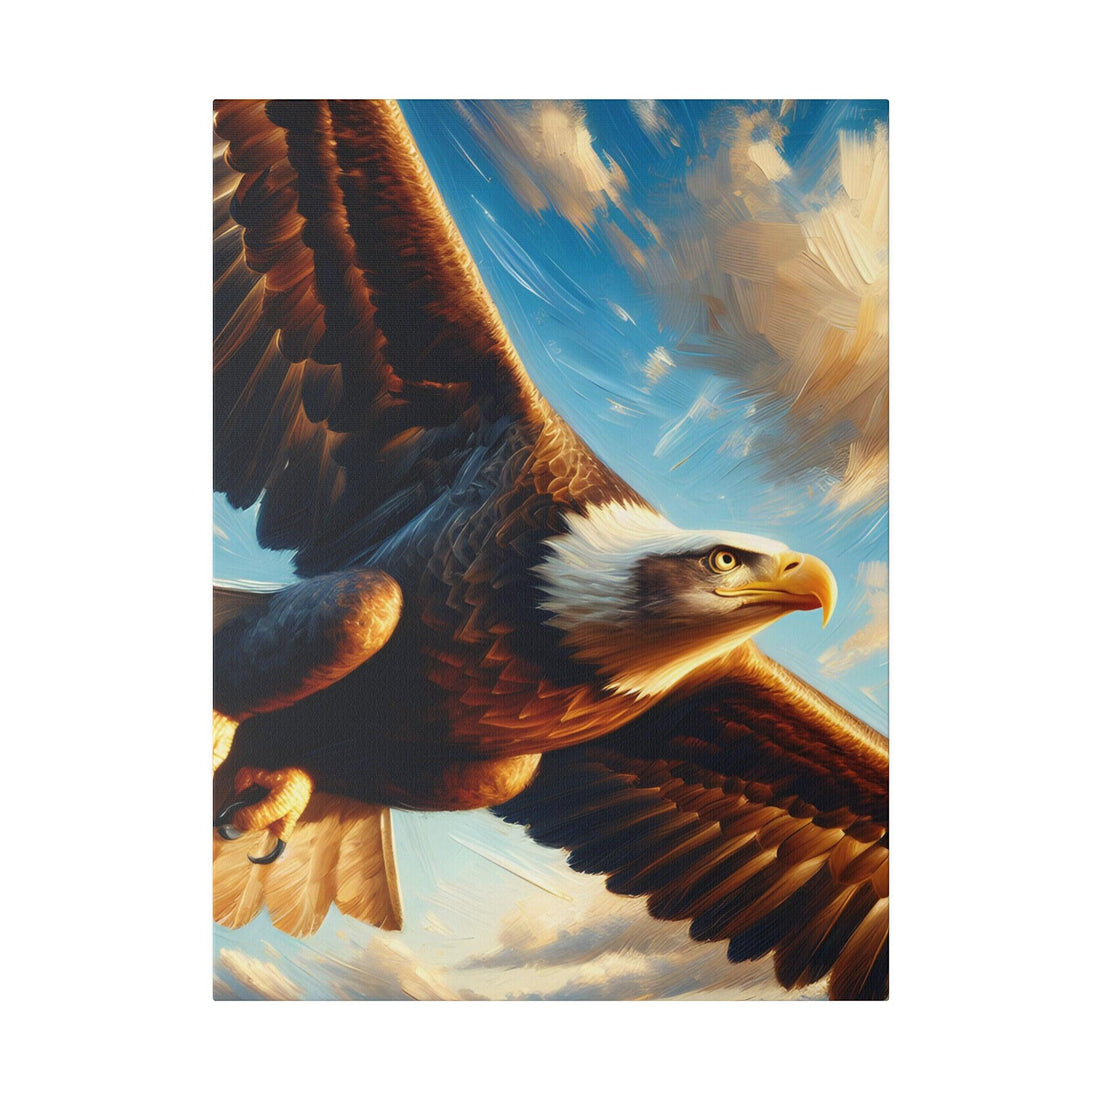 "Eagle's Majesty: Expressive Canvas Wall Art" - The Alice Gallery